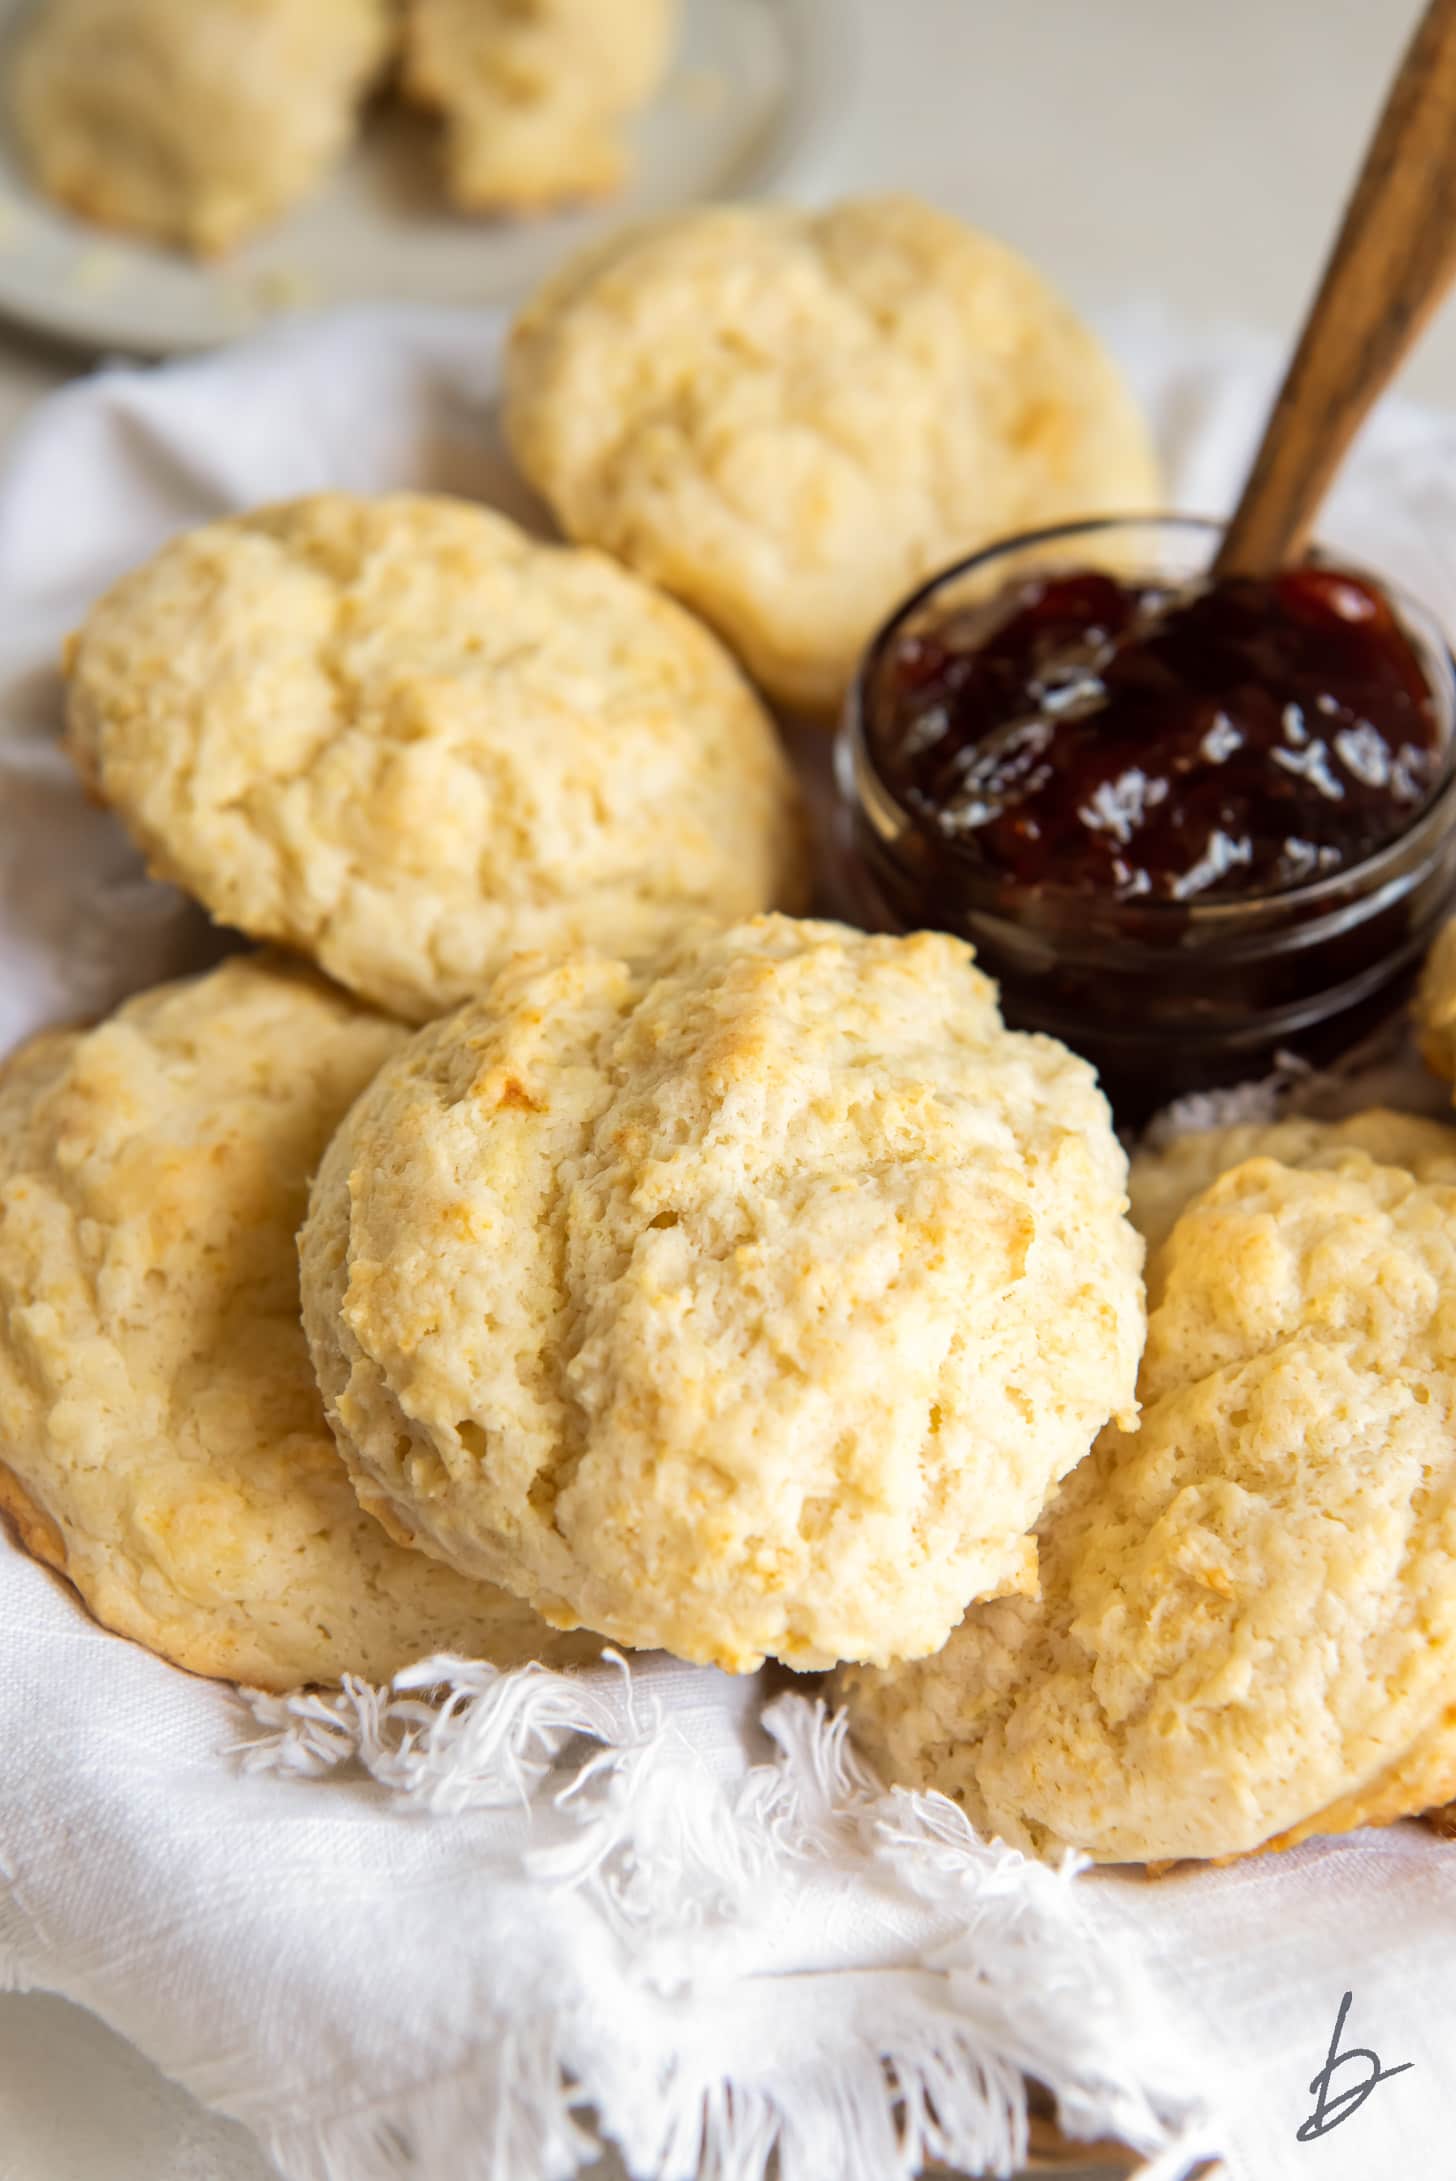 buttermilk drop biscuits on cloth in basket next to jar of jam.